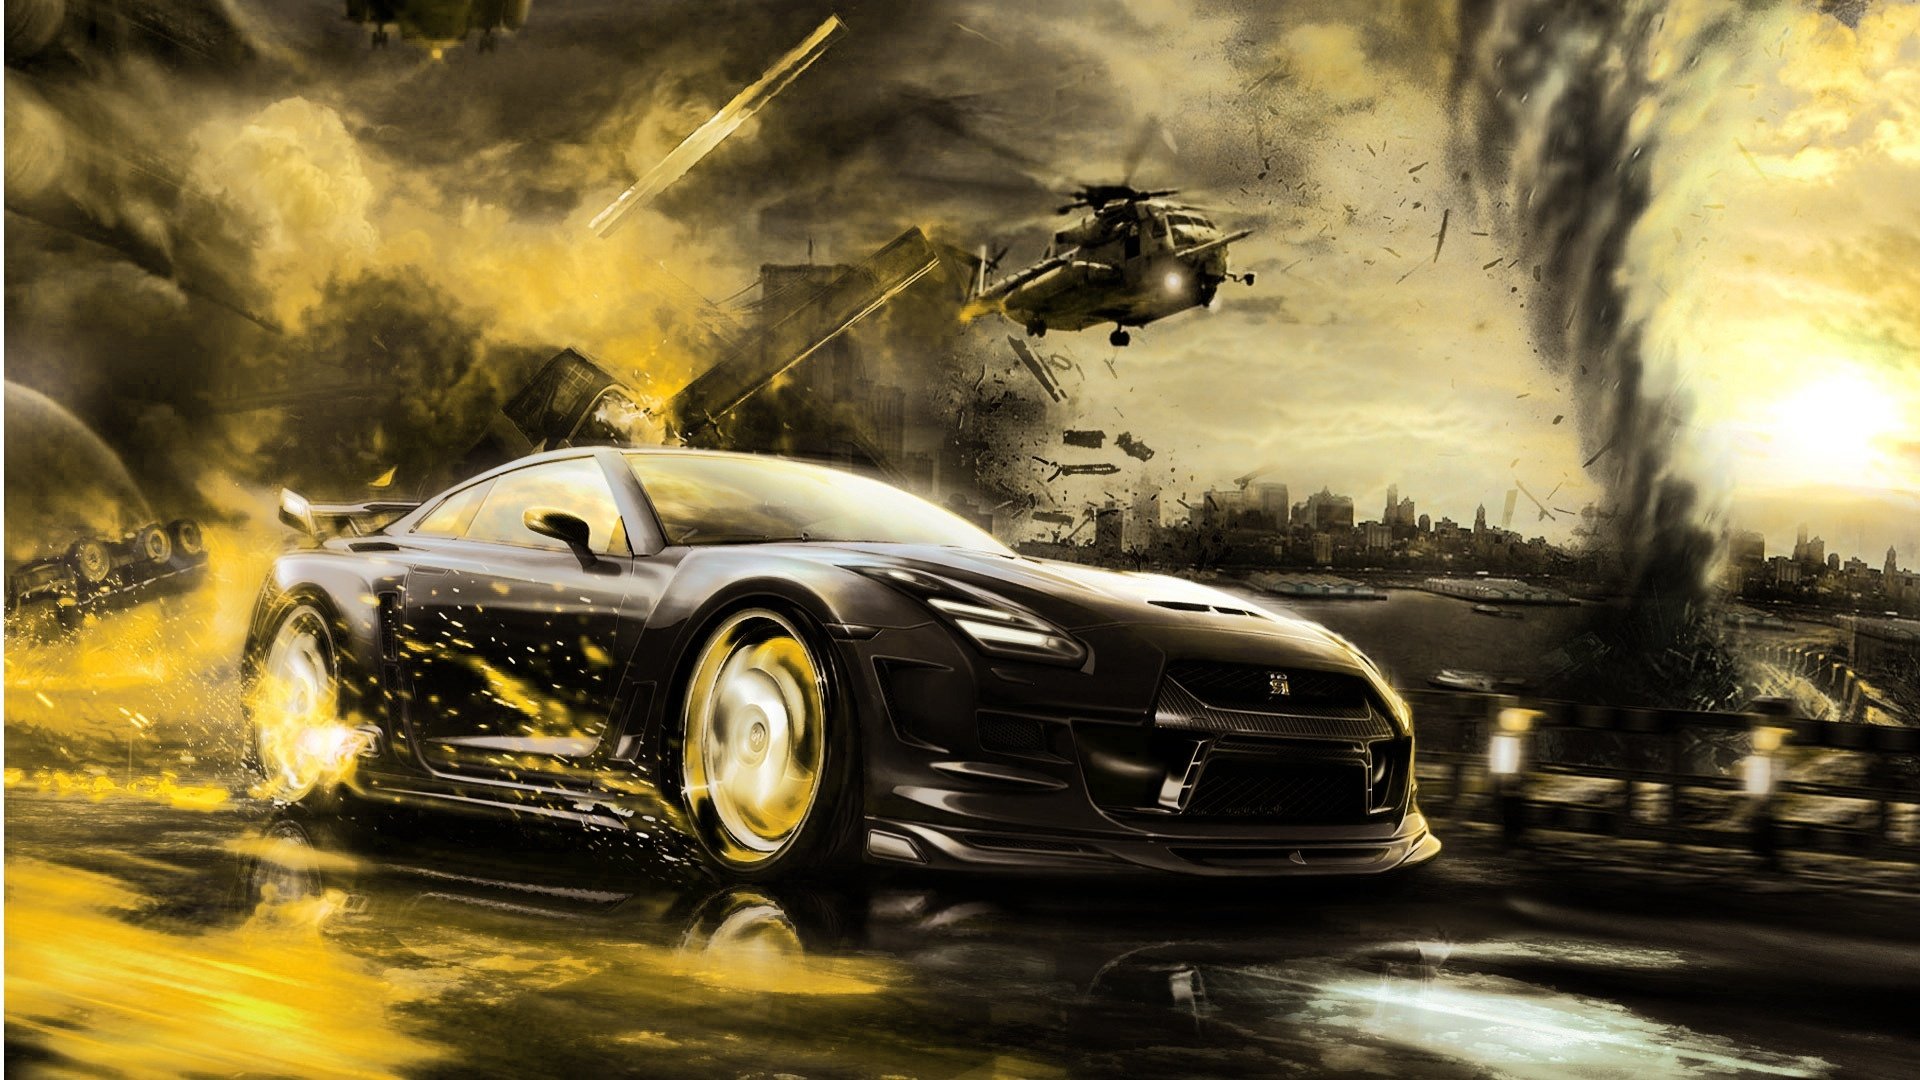  Car hd Wallpapers 1080p Awesome Collection Unique HD Wallpapers 1920x1080